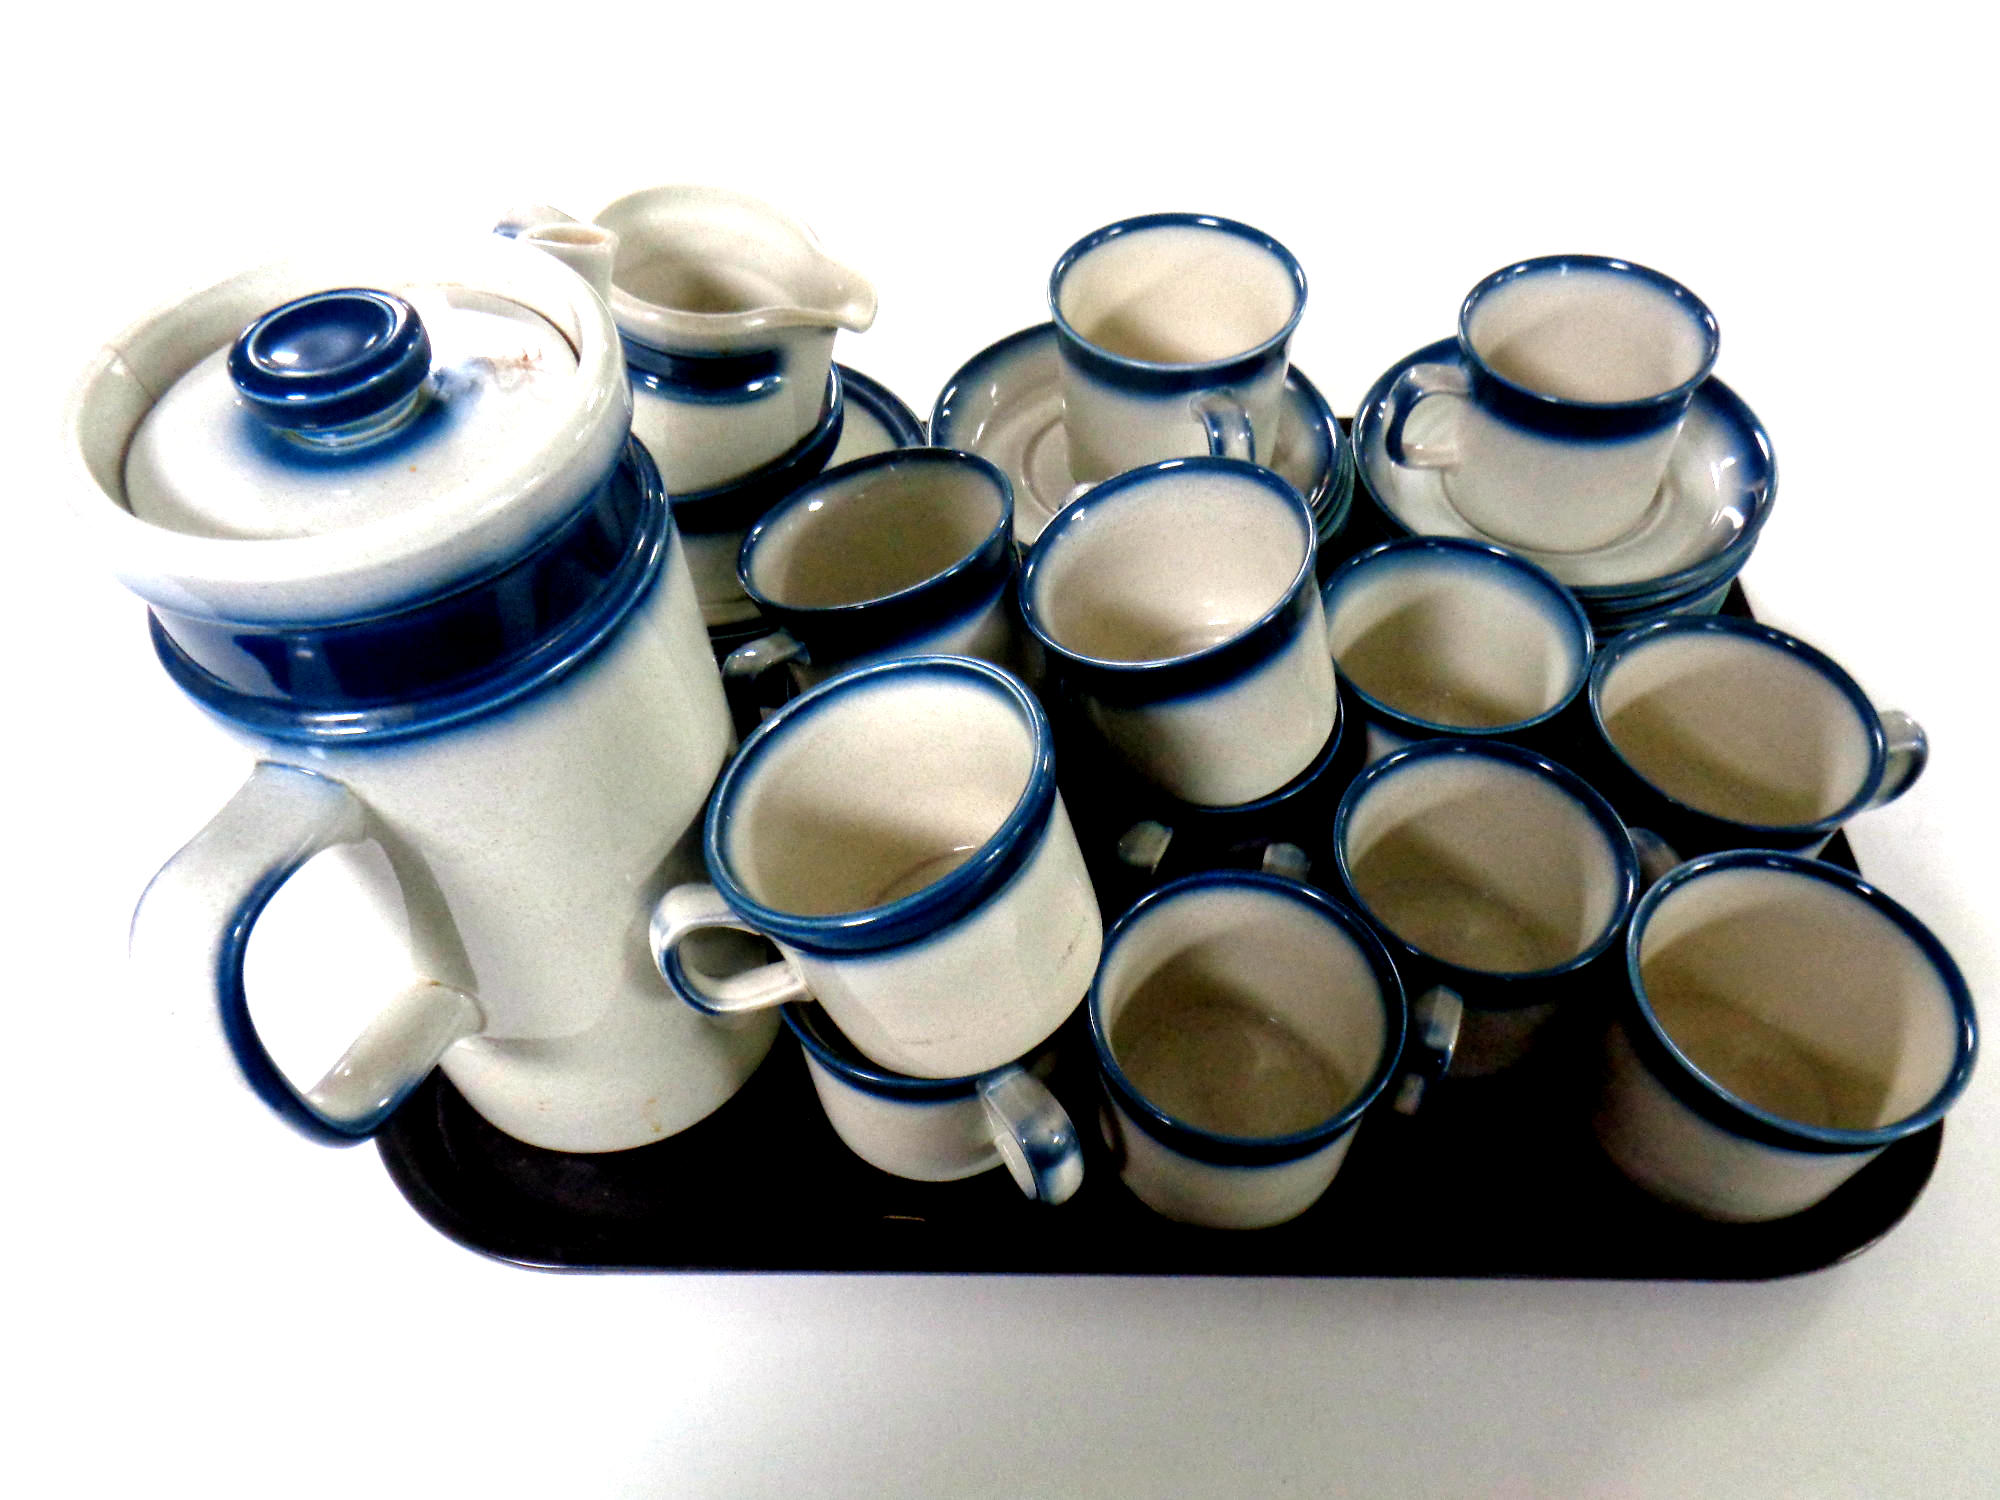 A tray containing 35 pieces of Wedgwood Blue Pacific coffee oven to table ware